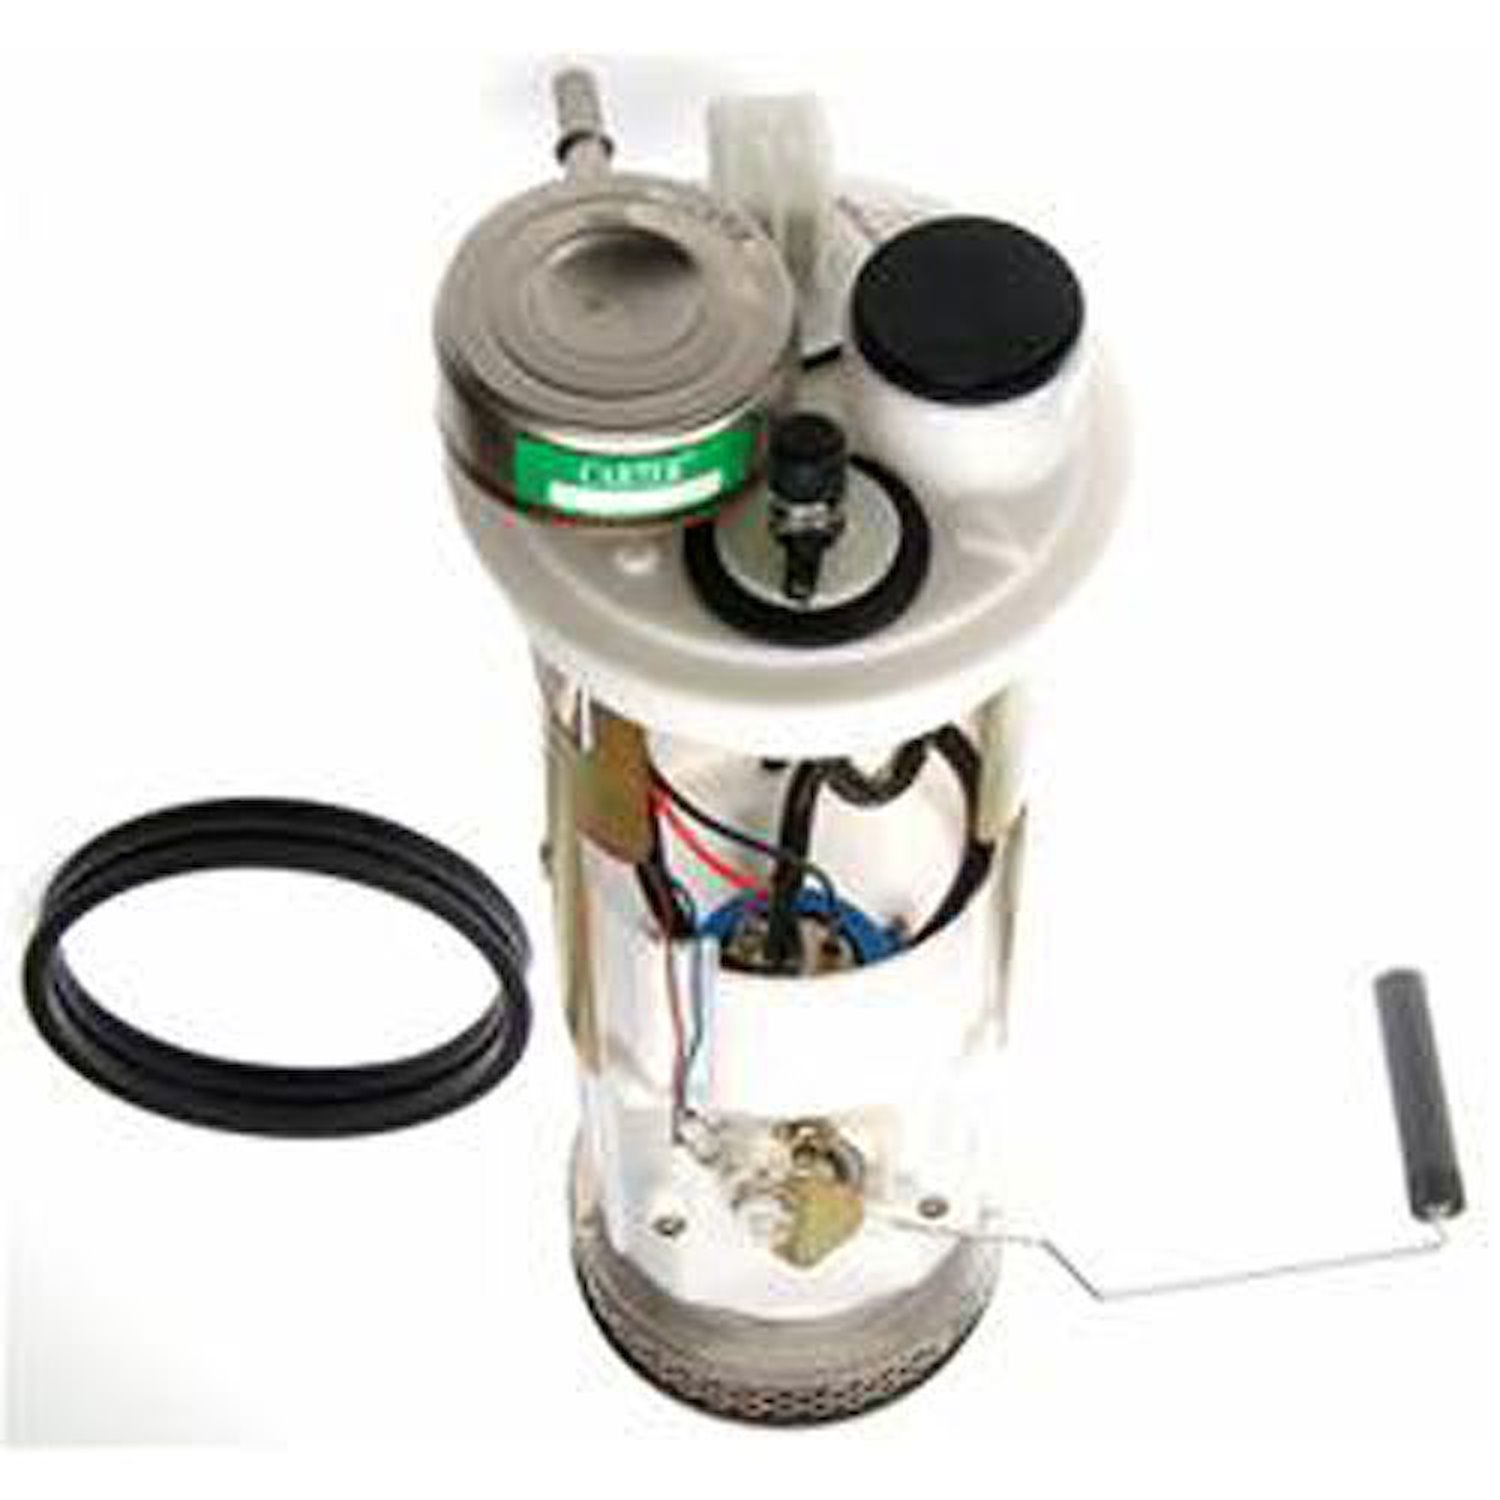 OE Chrysler/Dodge Replacement Electric Fuel Pump Module Assembly for 1998-2002 Ram 1500/2500/3500